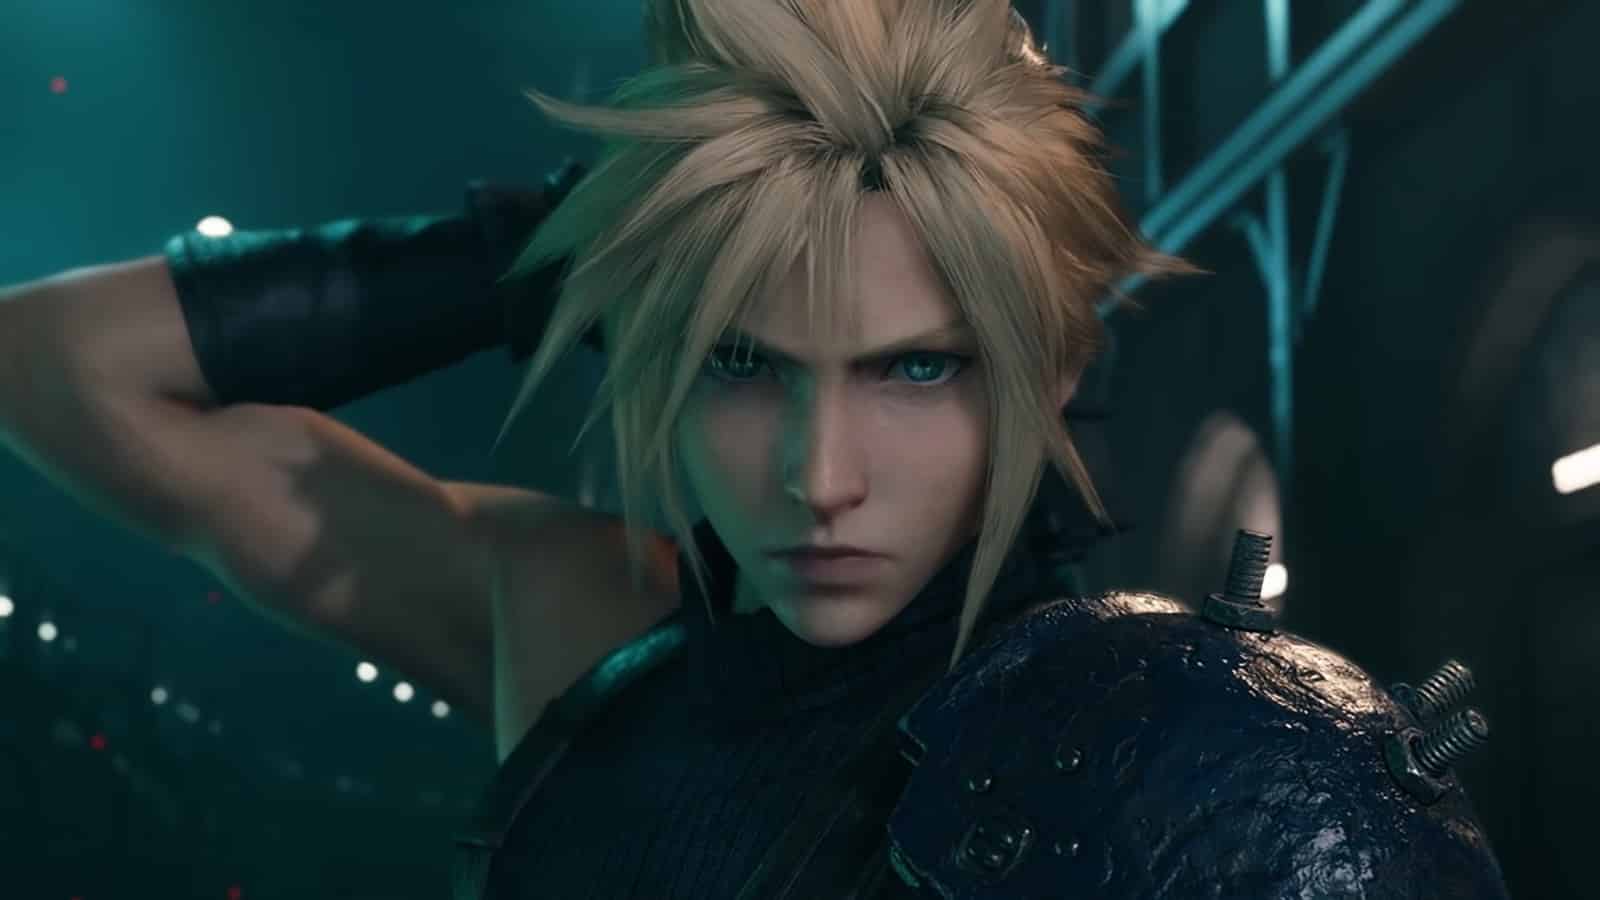 No, Final Fantasy 7 Rebirth Is Definitely Not Releasing on PS4